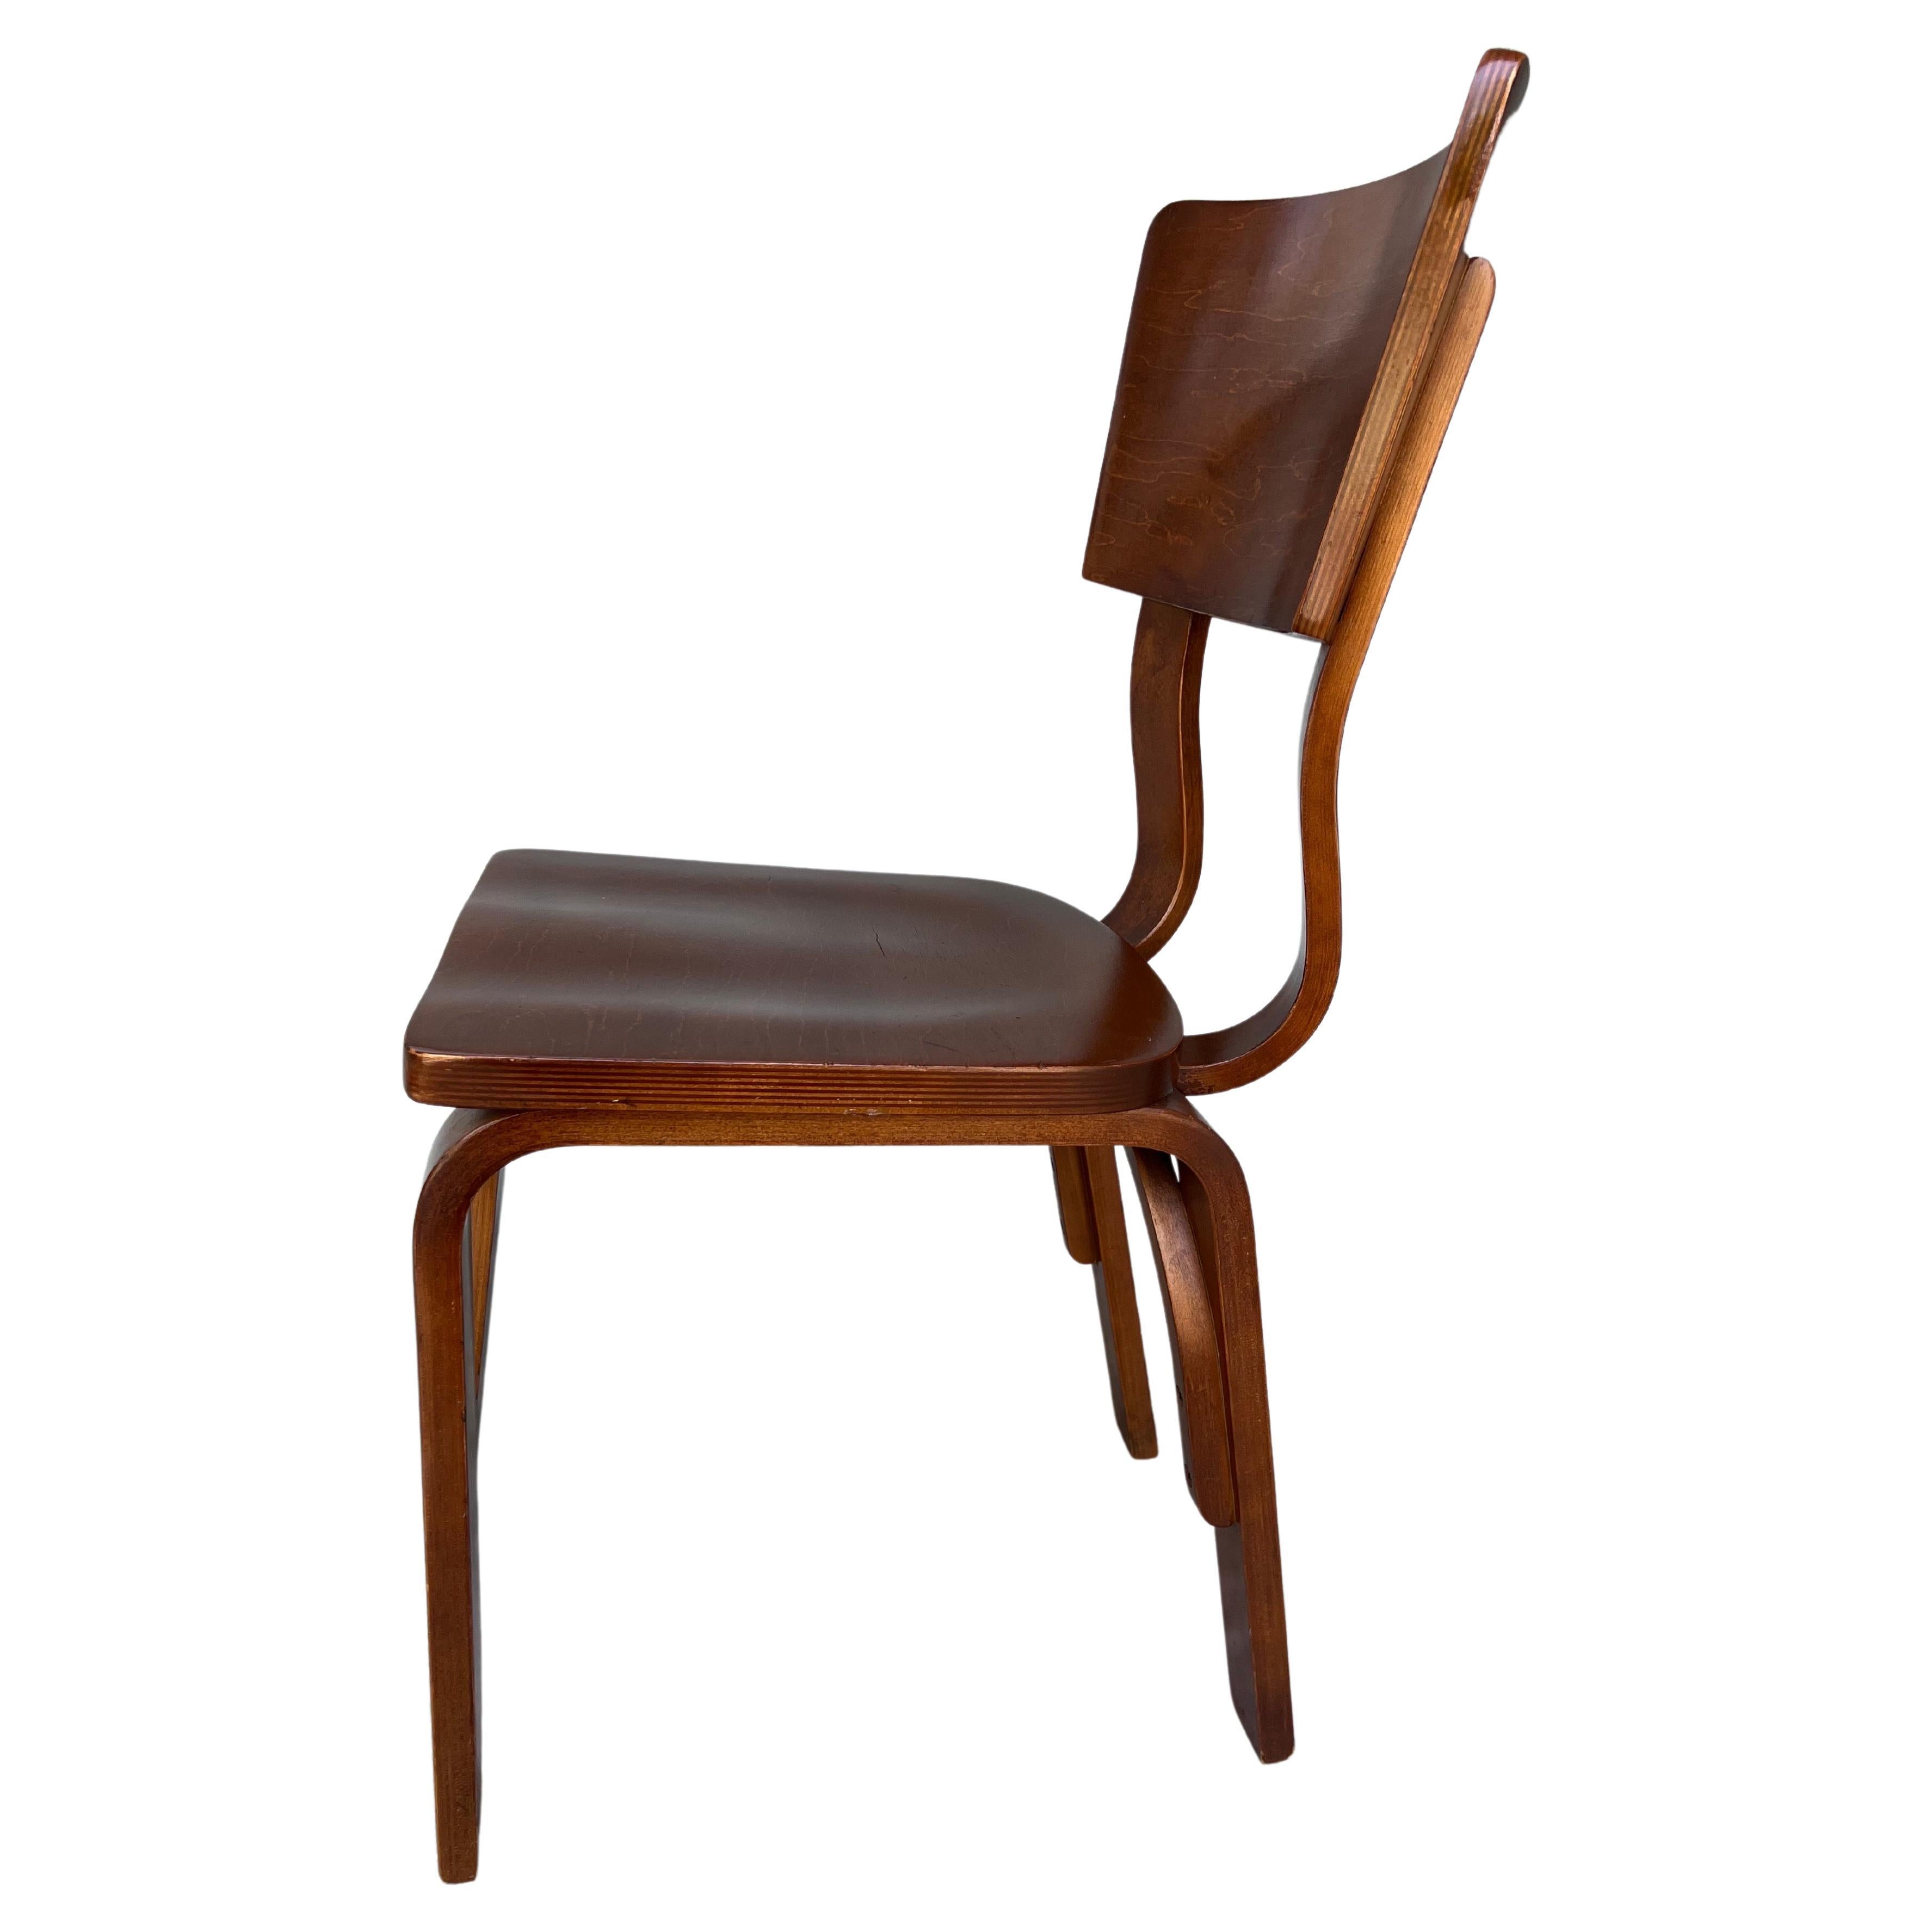 Perfectly patinaed bentwood Thonet chair. This chair is stately, classic, comfortable, and sturdy. Constructed from modeled bent plywood and finished with a walnut stain. This is the perfect chair for your office or to complete a dining set. Make it